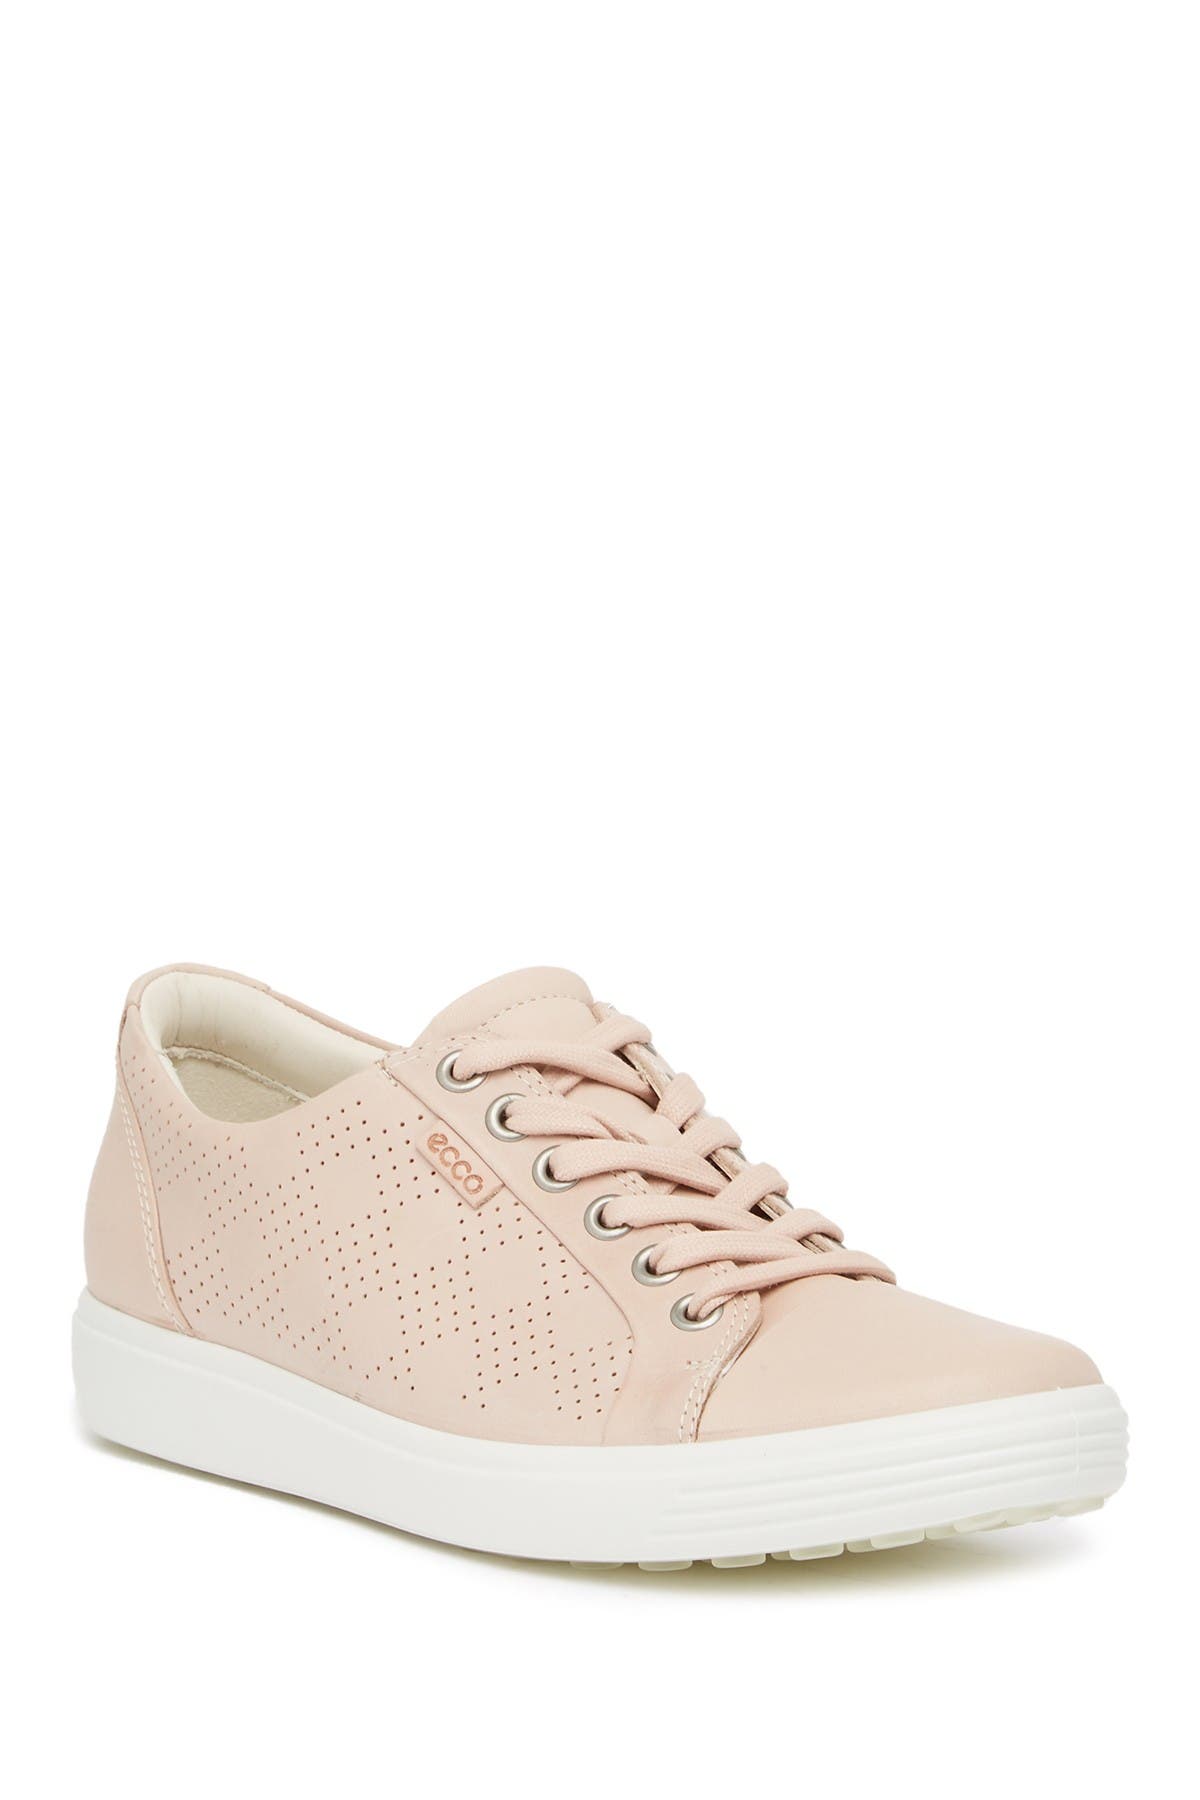 soft 7 long lace perforated sneaker